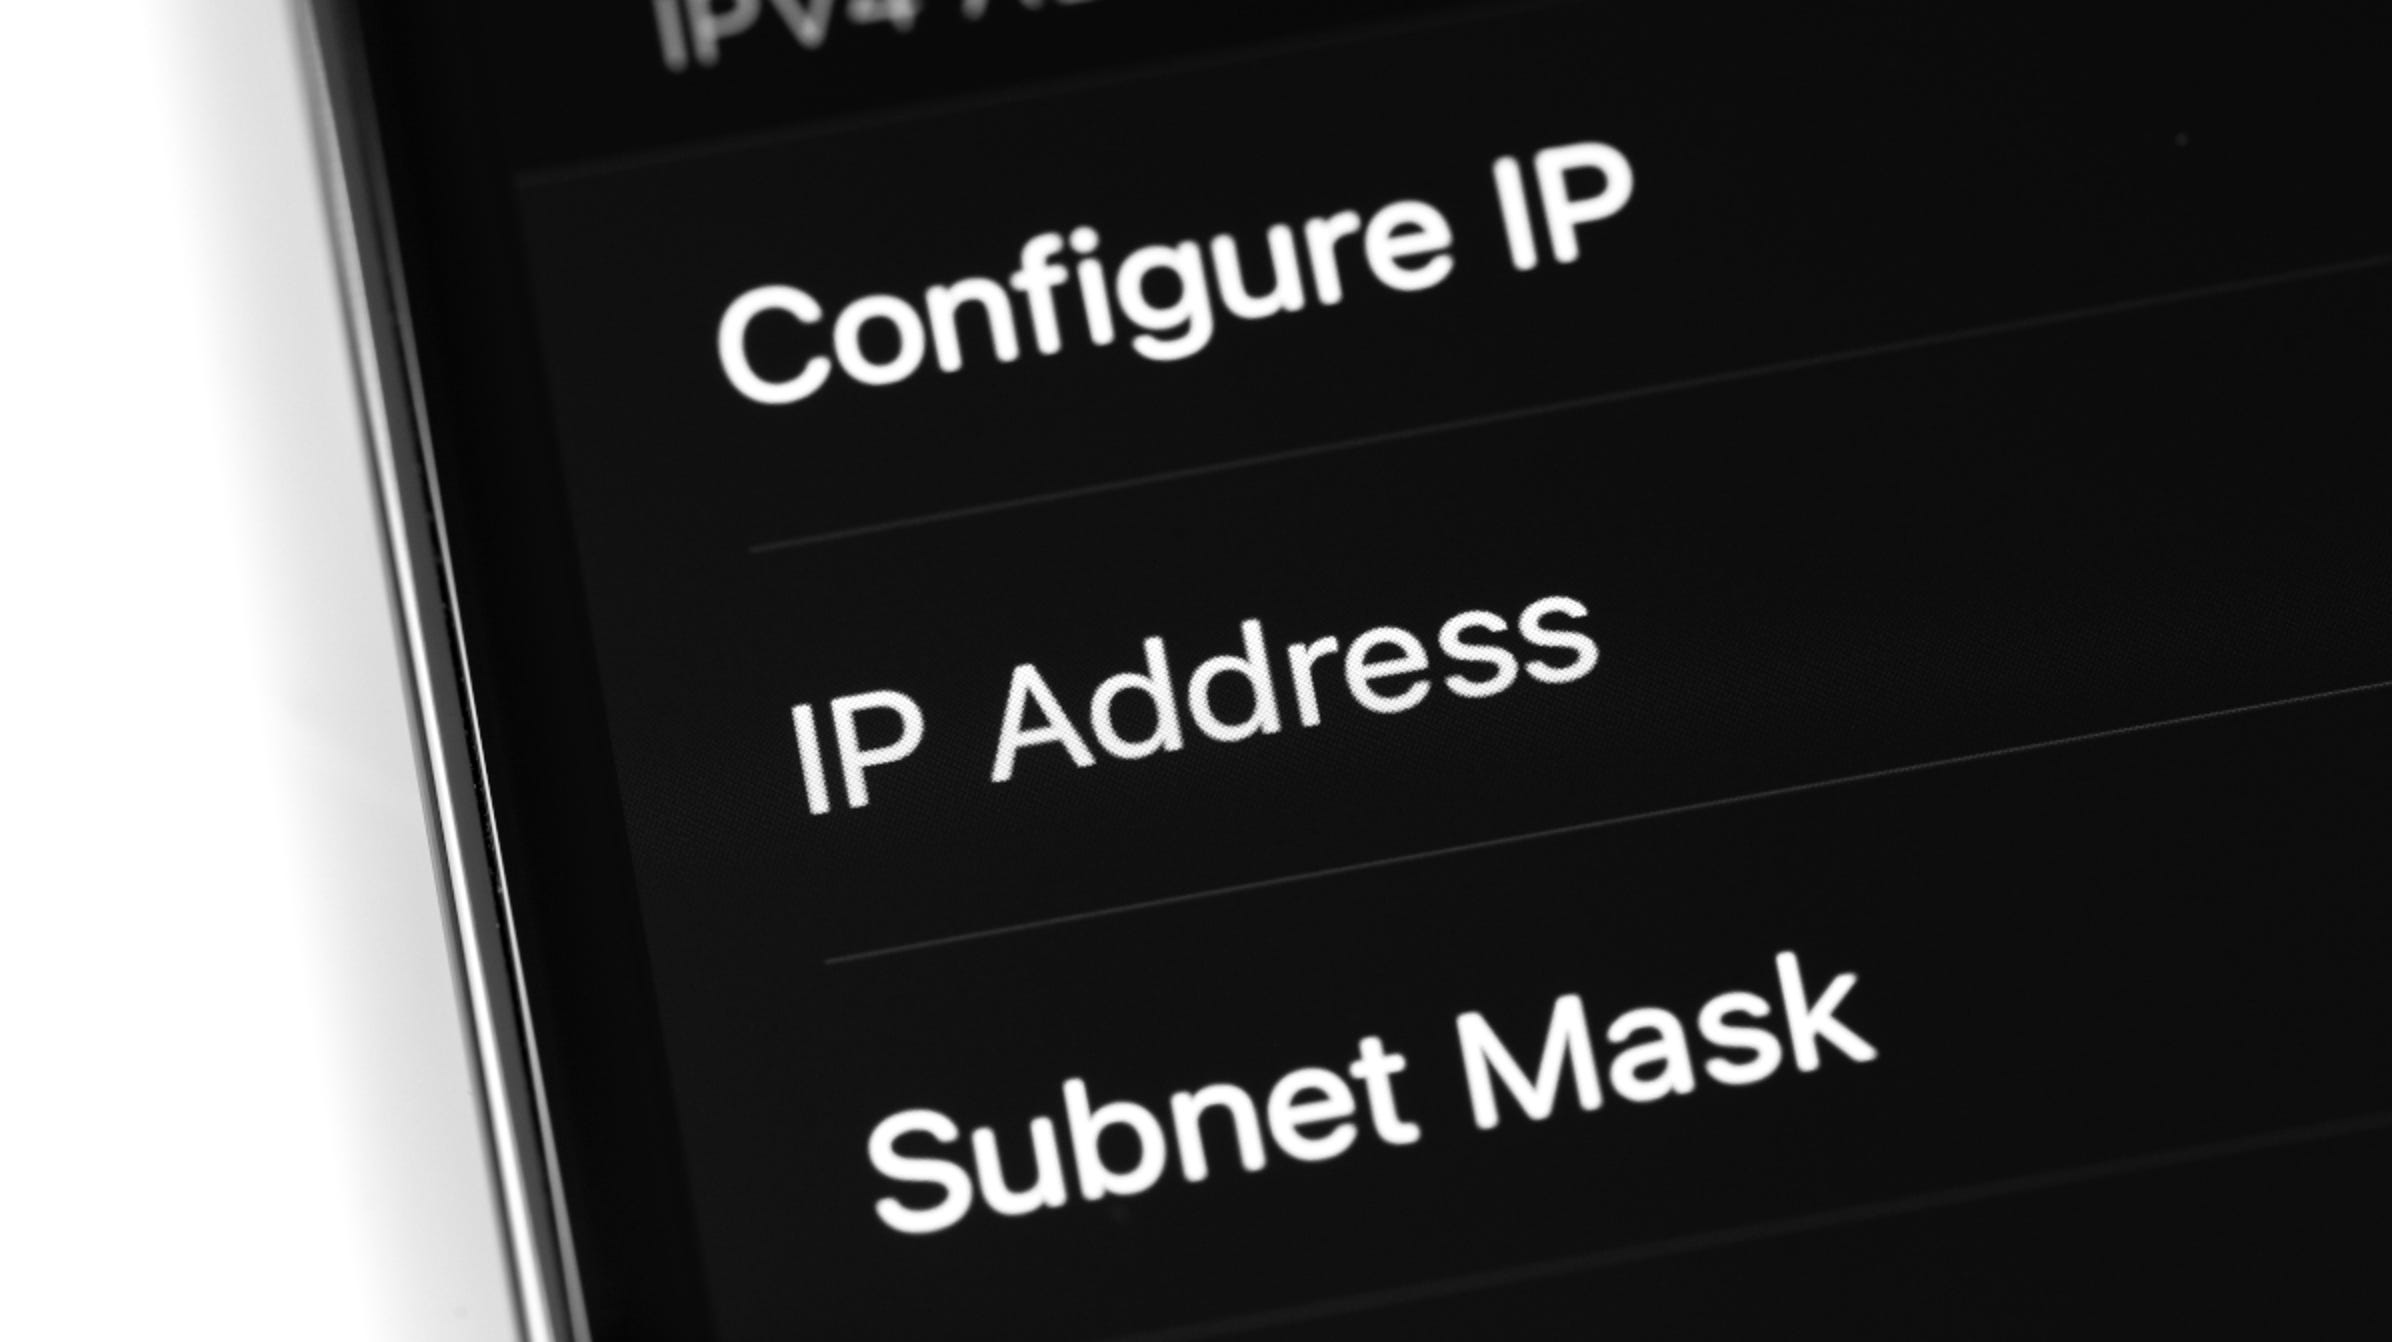 How to Change the IP Address on iPhone